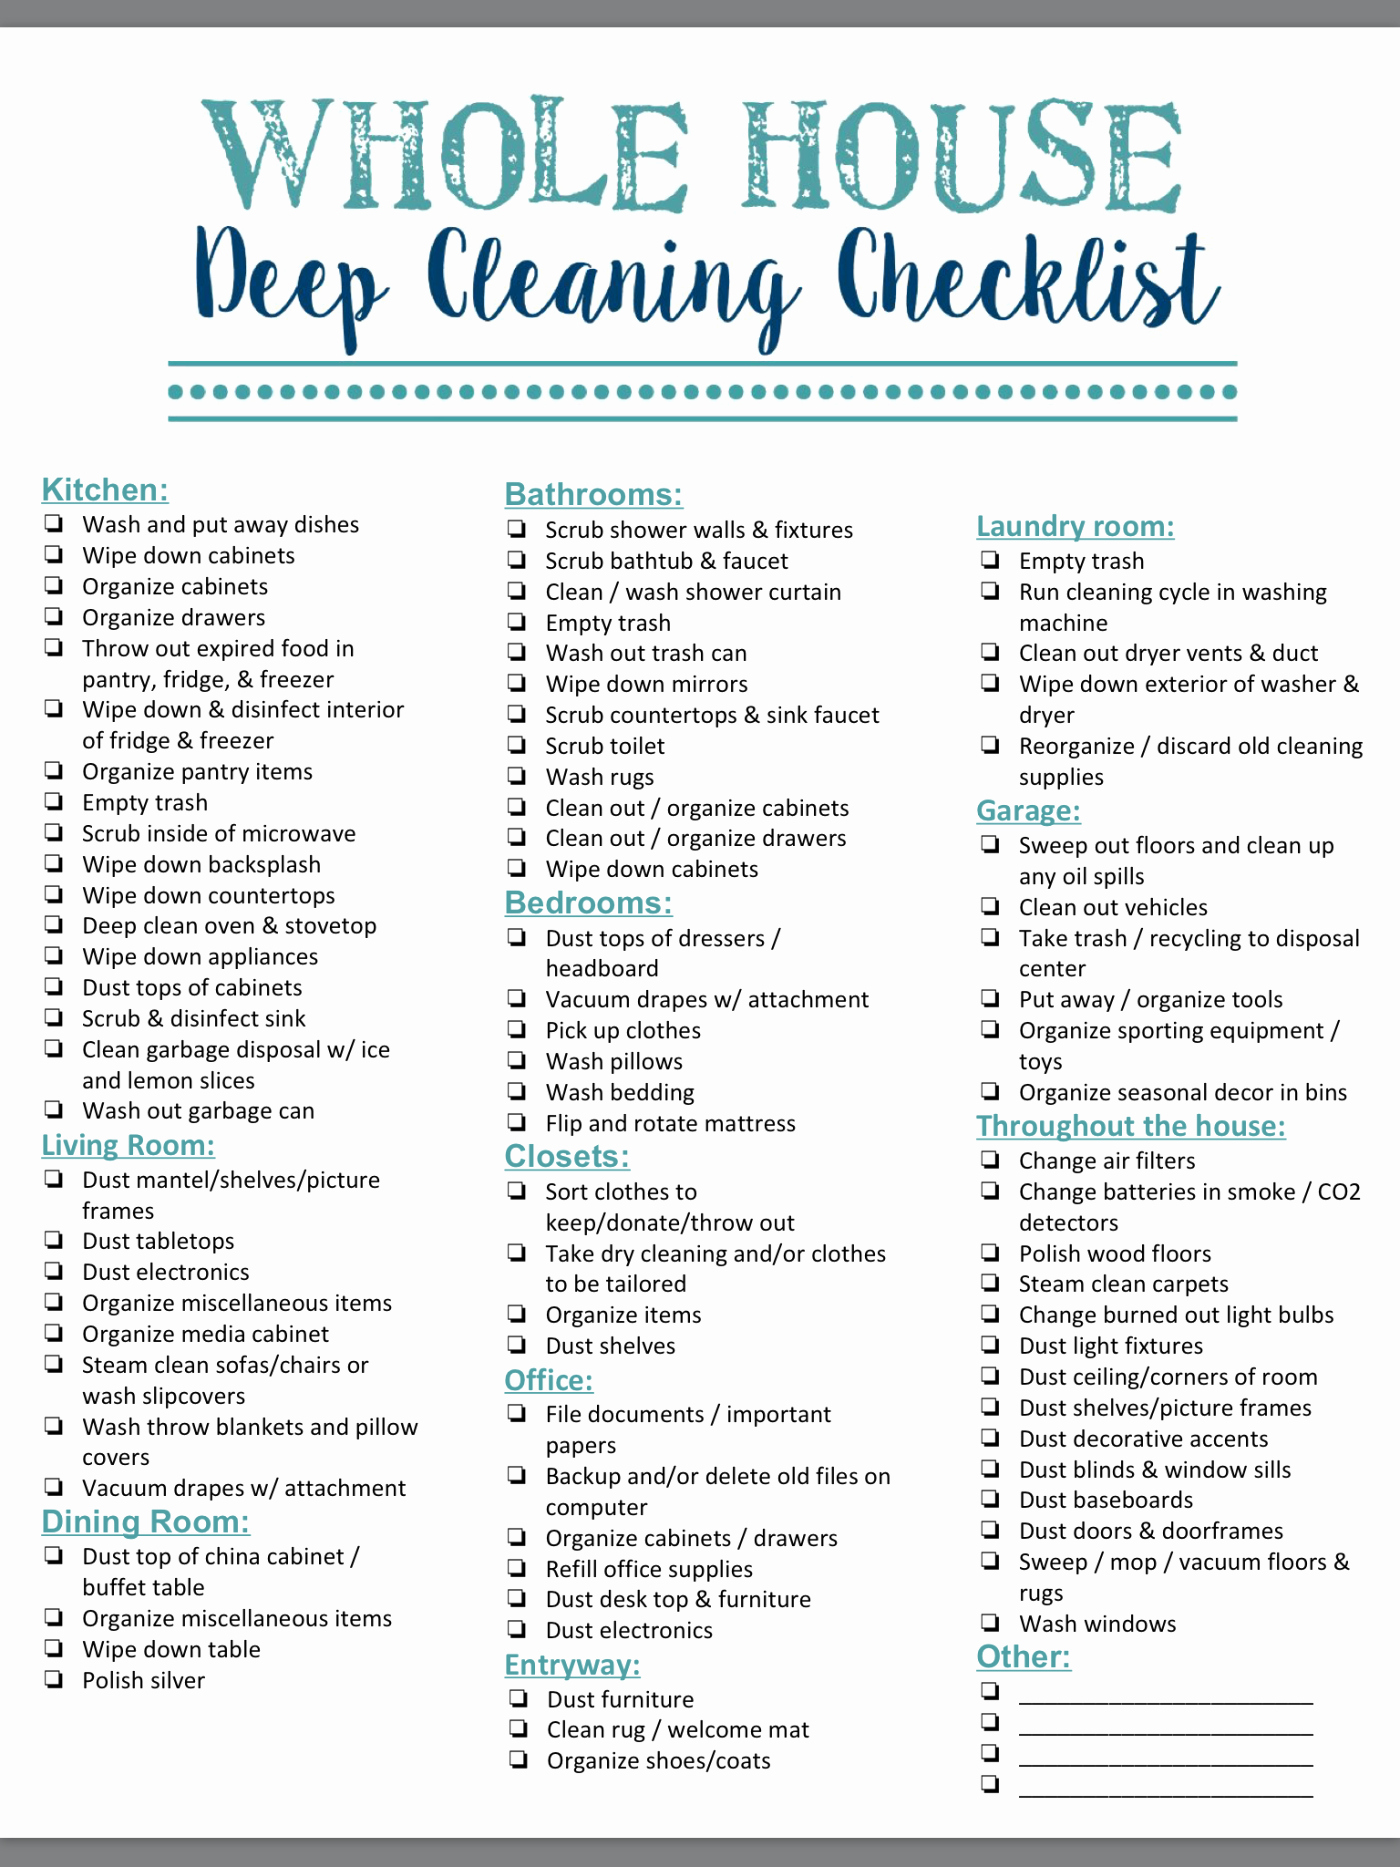 House Cleaning Checklist Template Luxury 40 Helpful House Cleaning Checklists for You